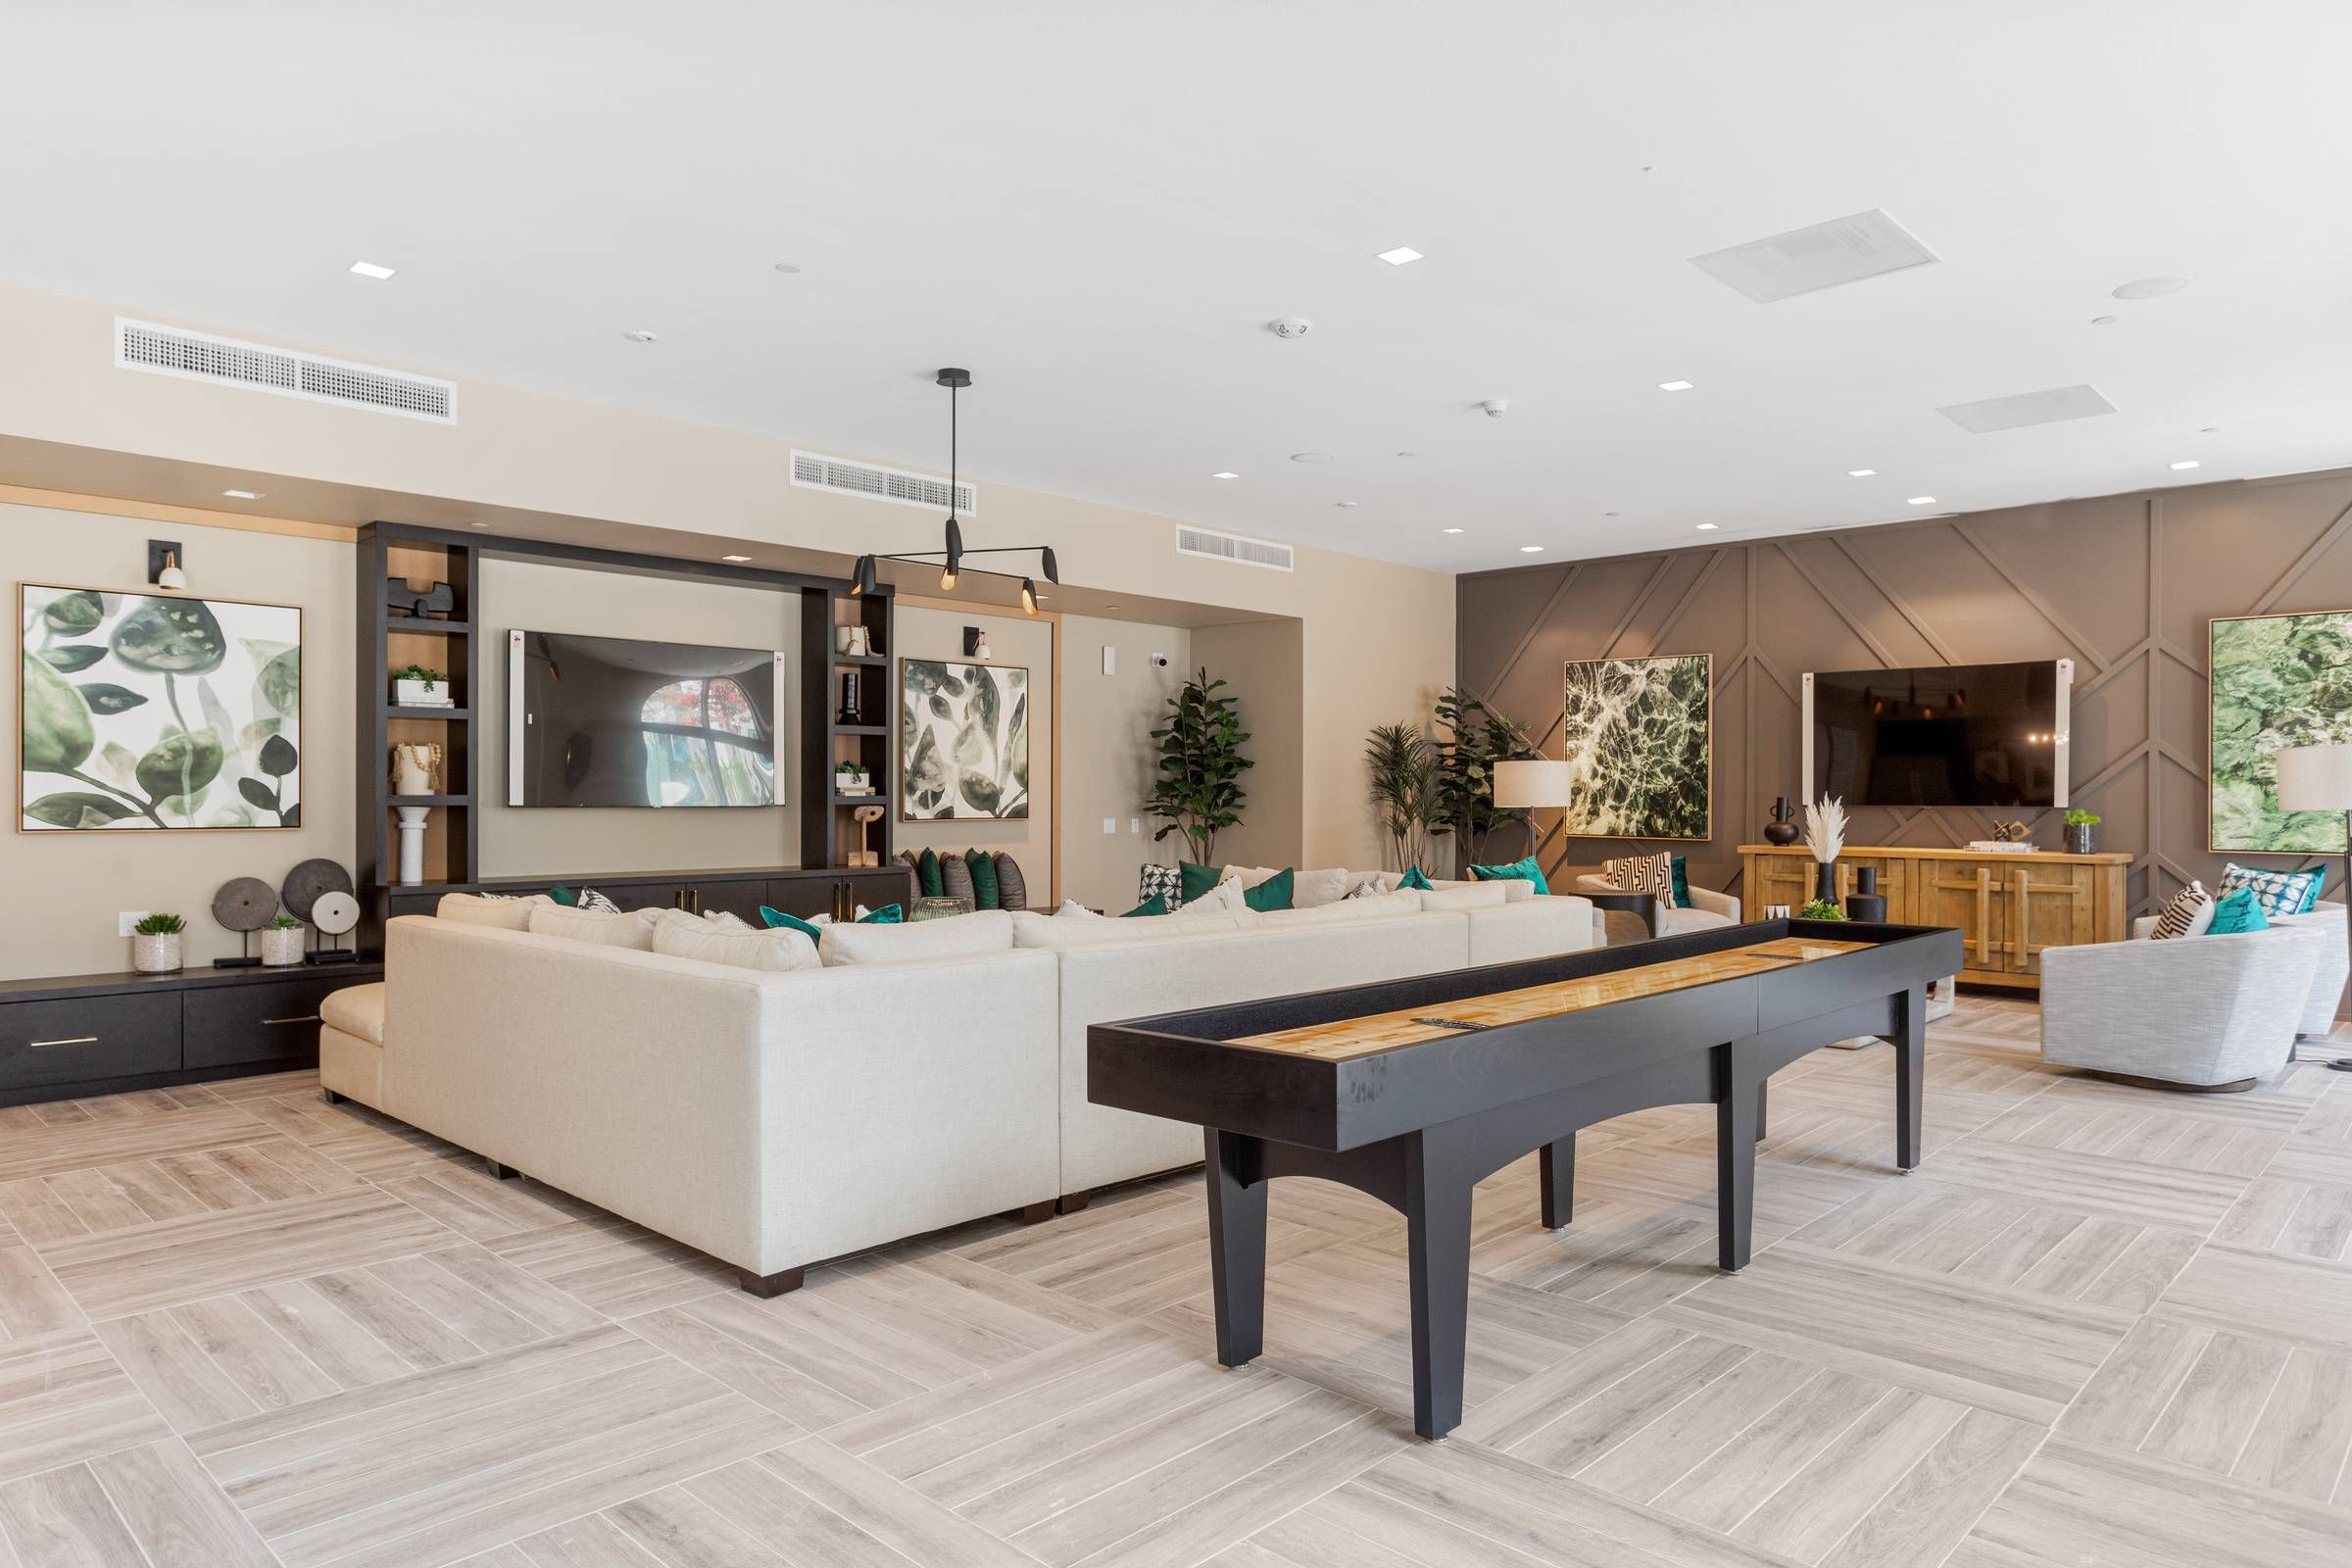 The stylish community room at Alta Upland exudes comfort with its cream-colored sectional, patterned cushions, and round coffee tables, creating an inviting space for relaxation.